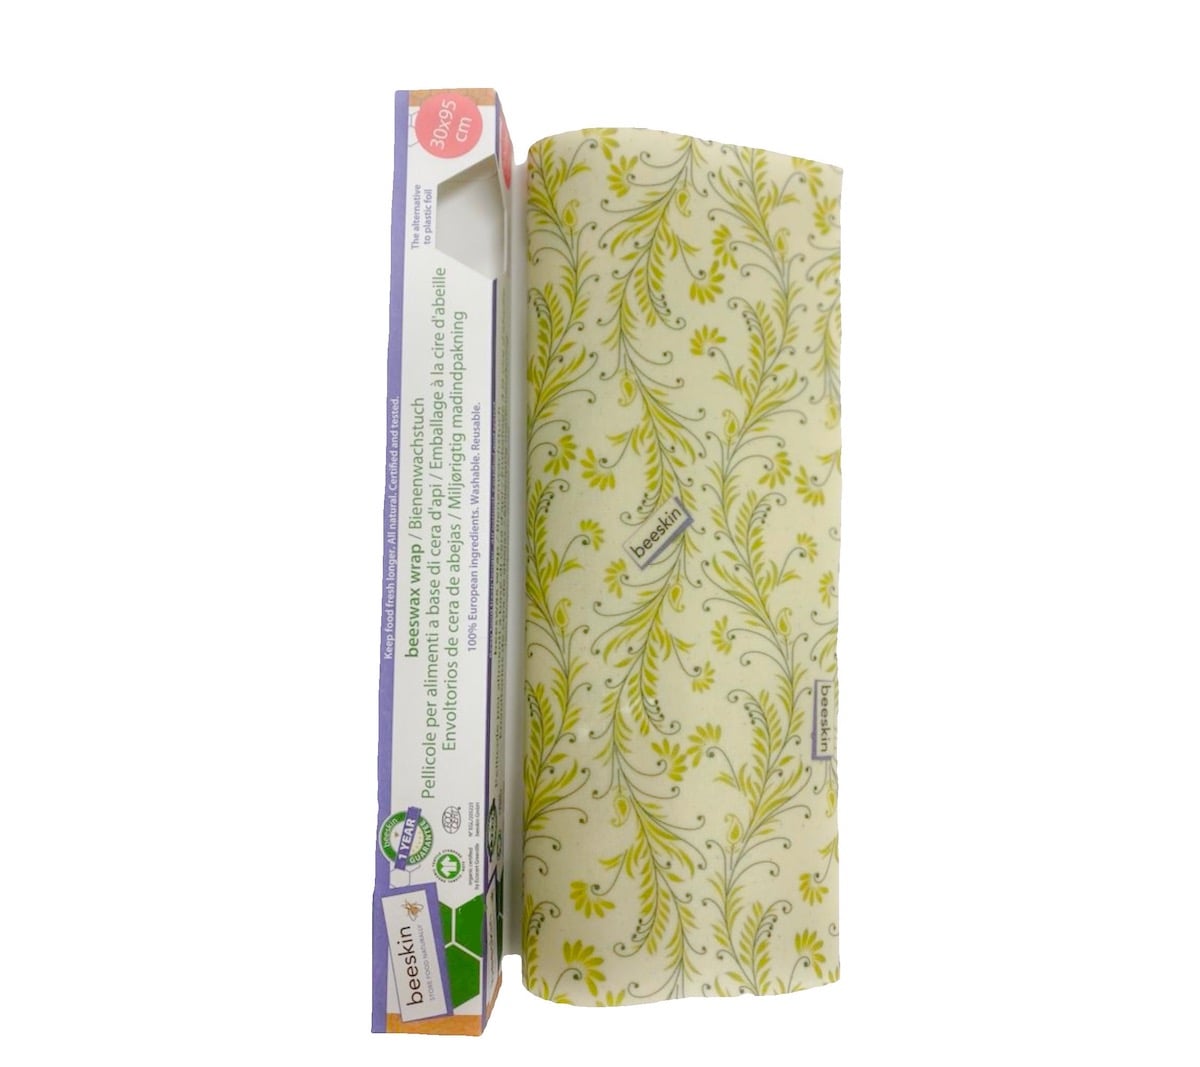 beeskin beeswax wrap roll-30x95cm - no packaging